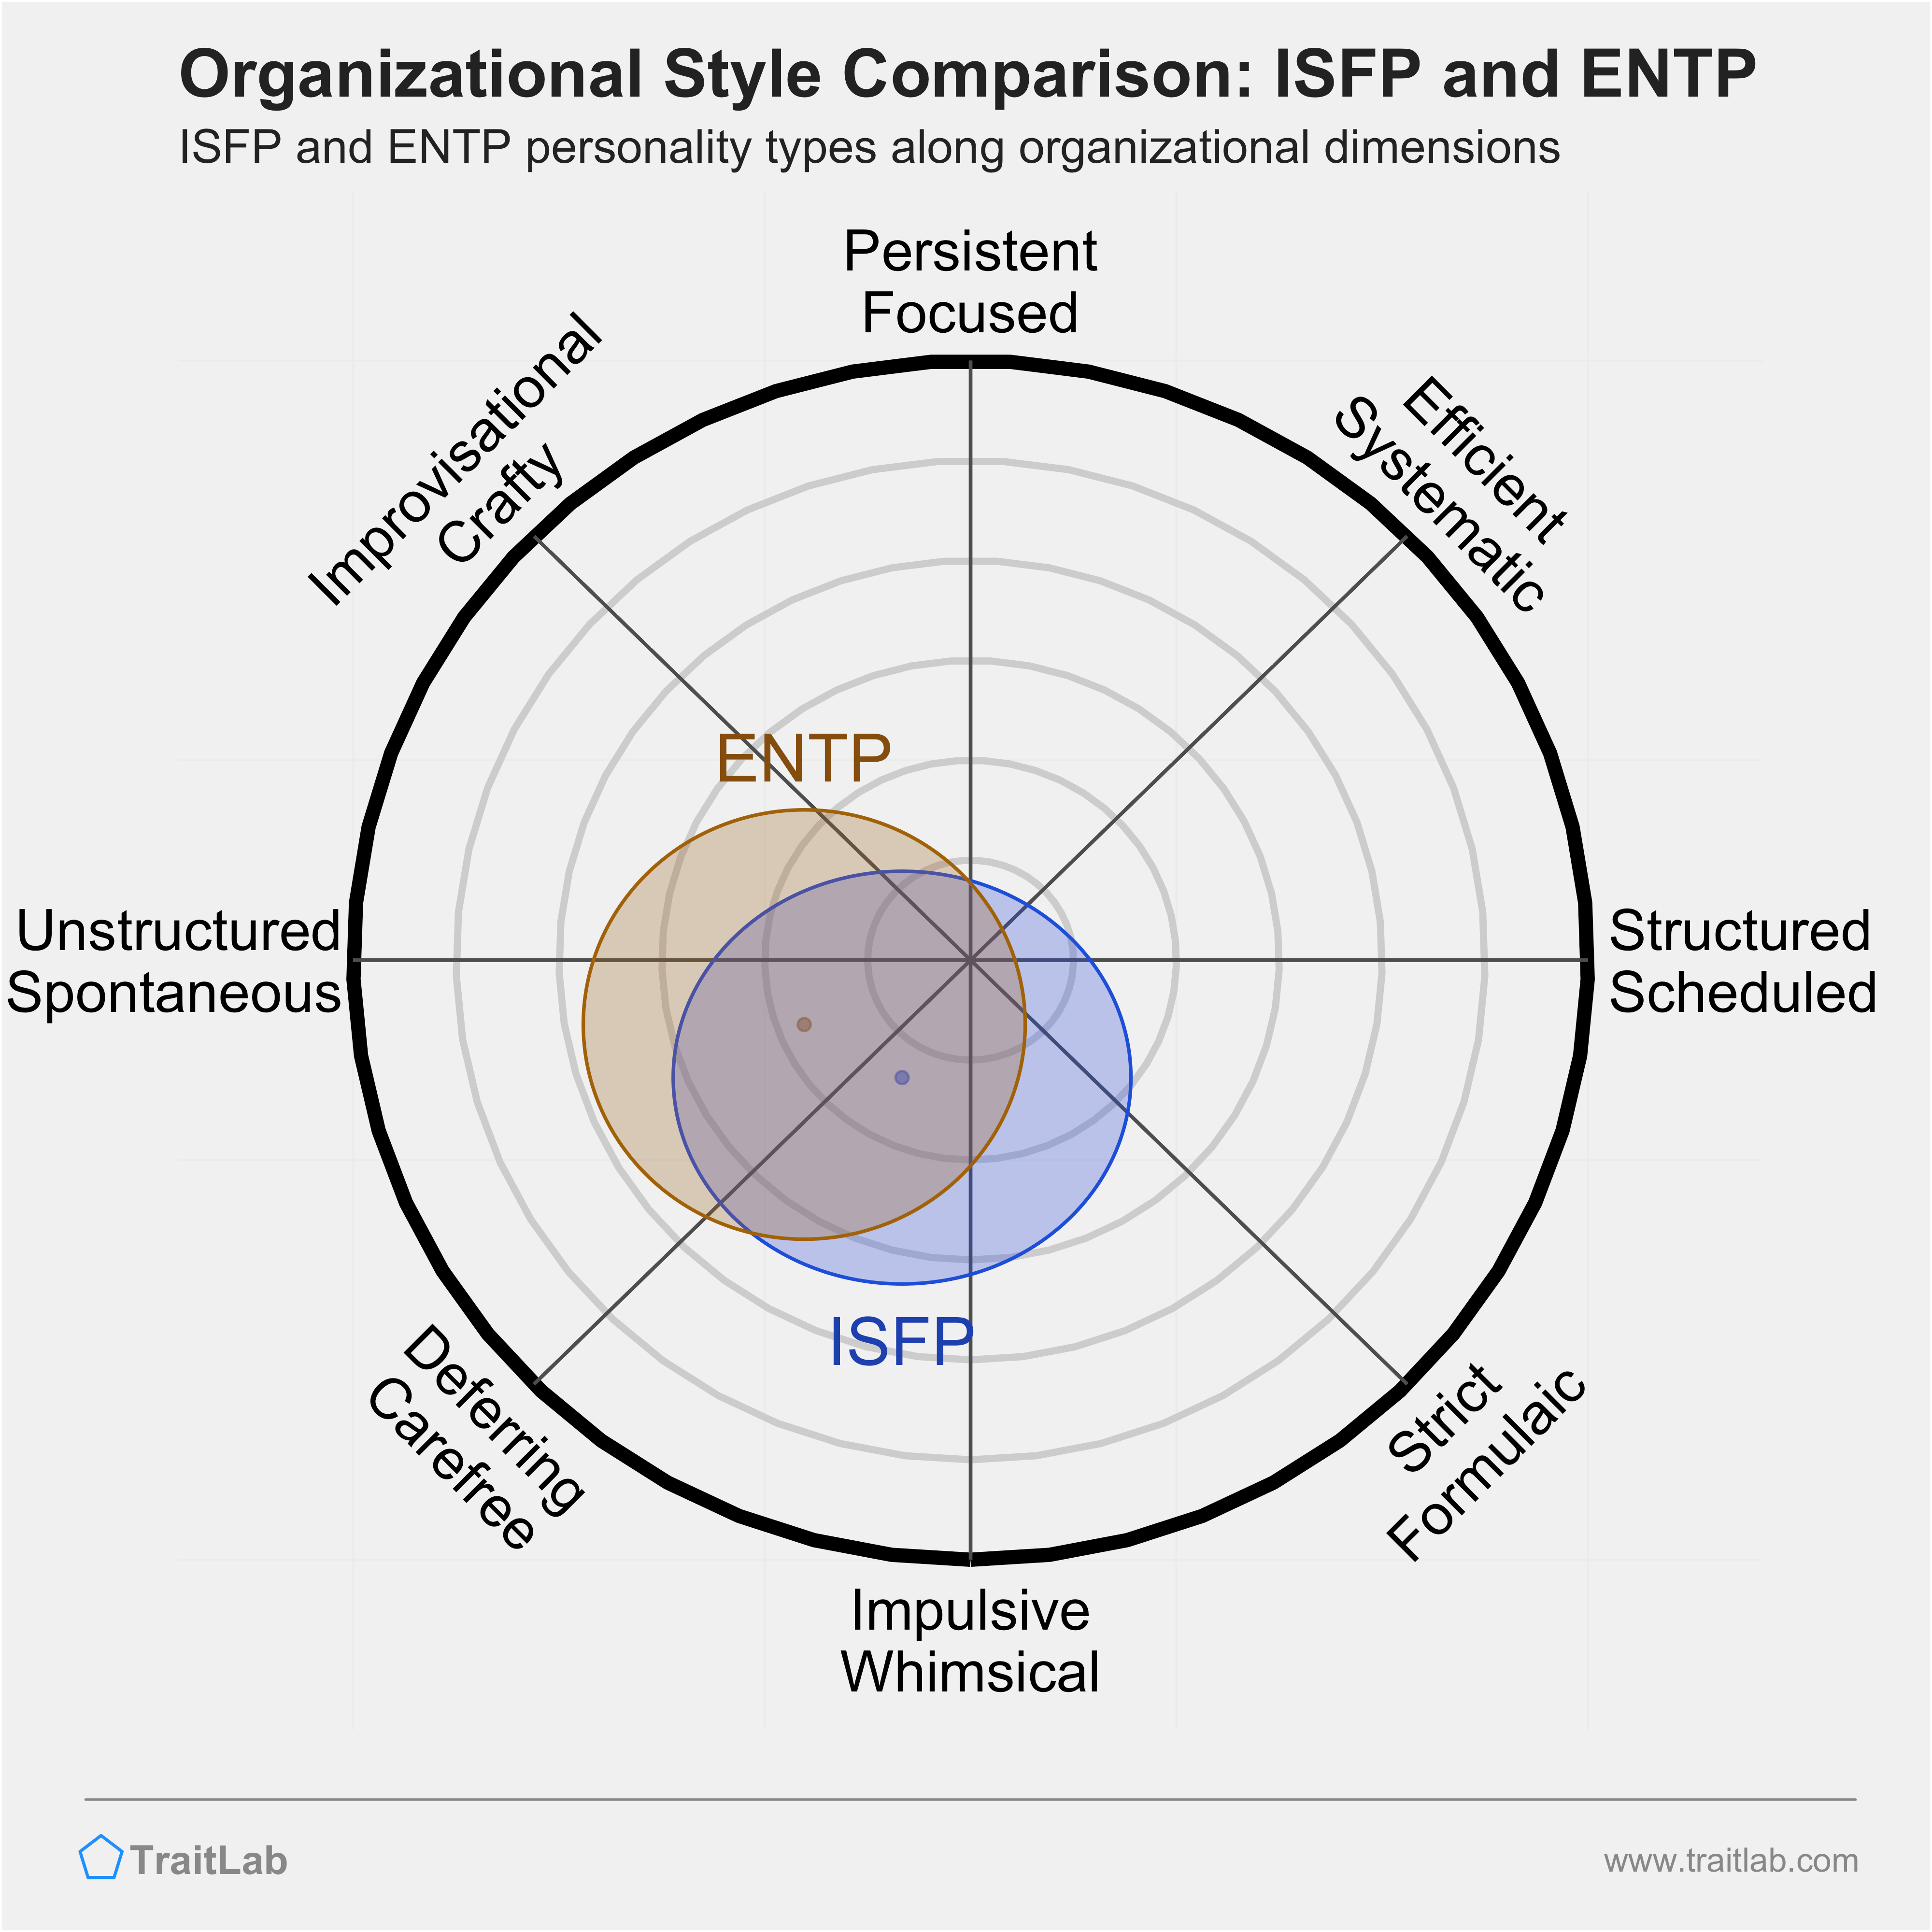 ISFP and ENTP comparison across organizational dimensions